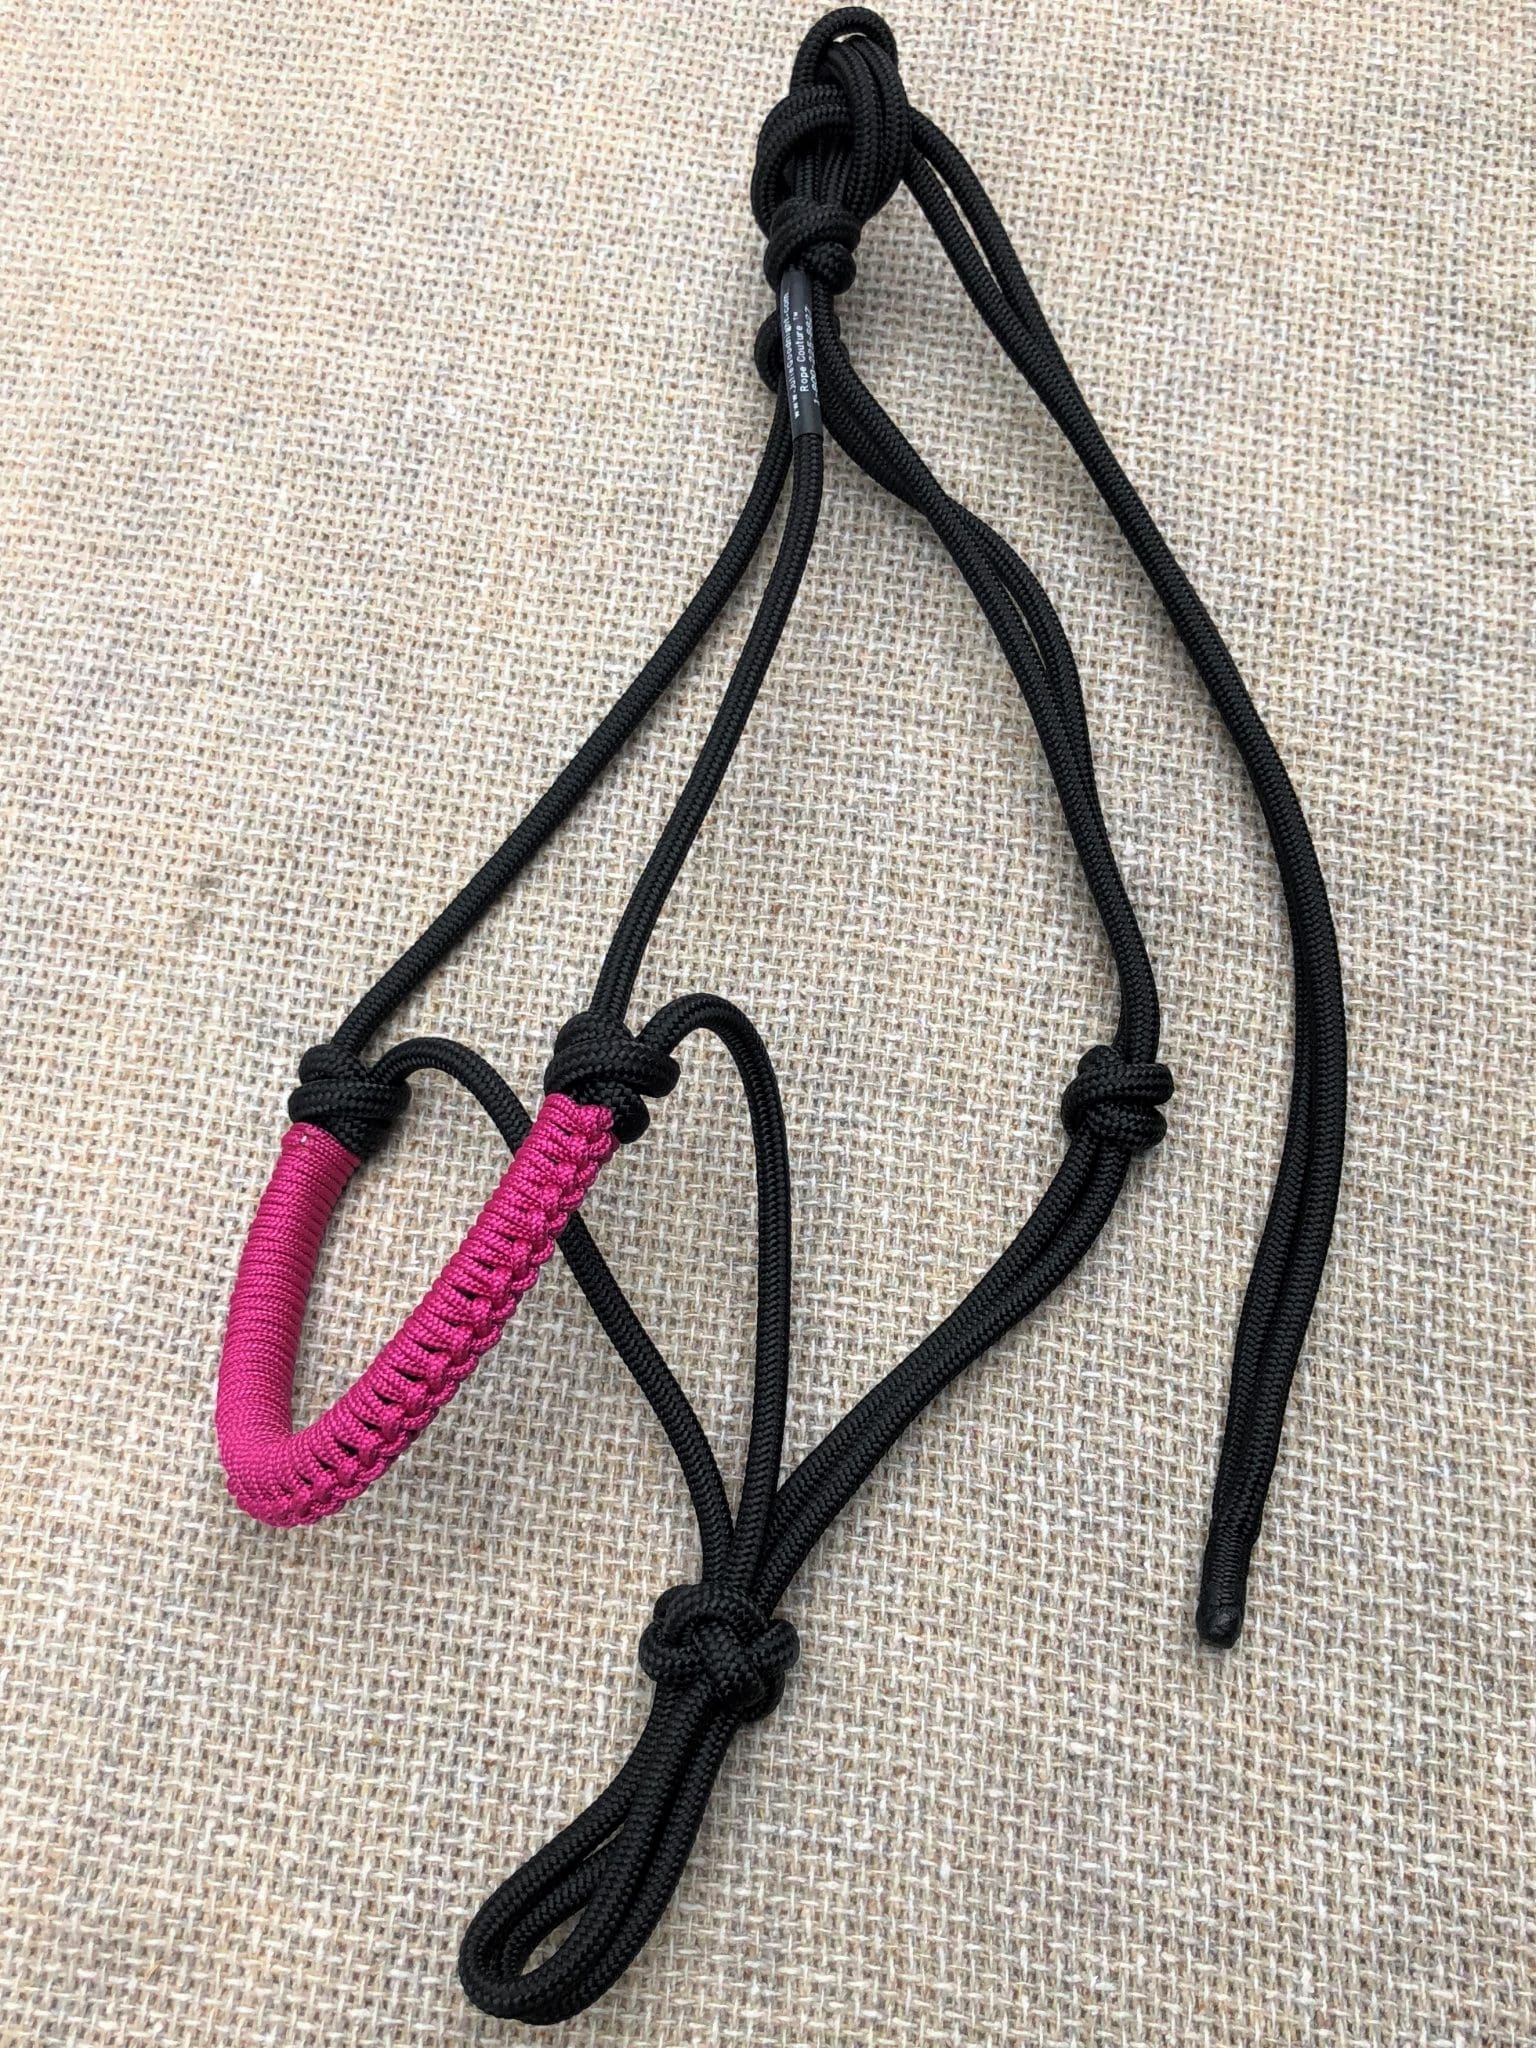 Nautical Black Rope Leash: Jolly Roger Collection